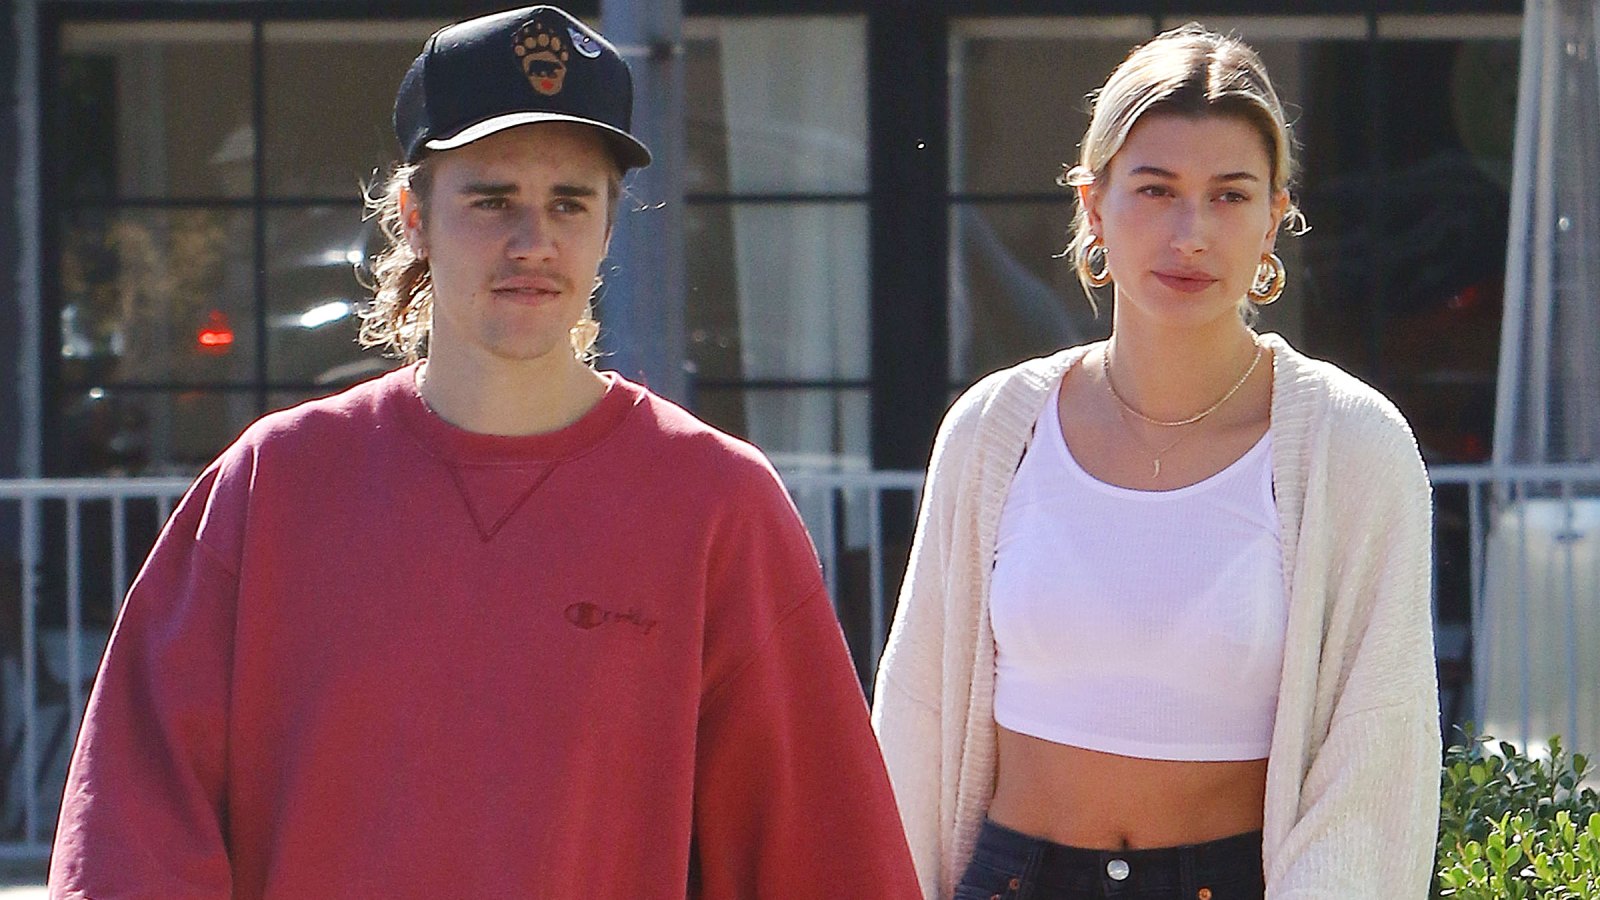 Justin Bieber Posts Adorable Throwback Photo With Wife Hailey Baldwin Ahead of Second Wedding